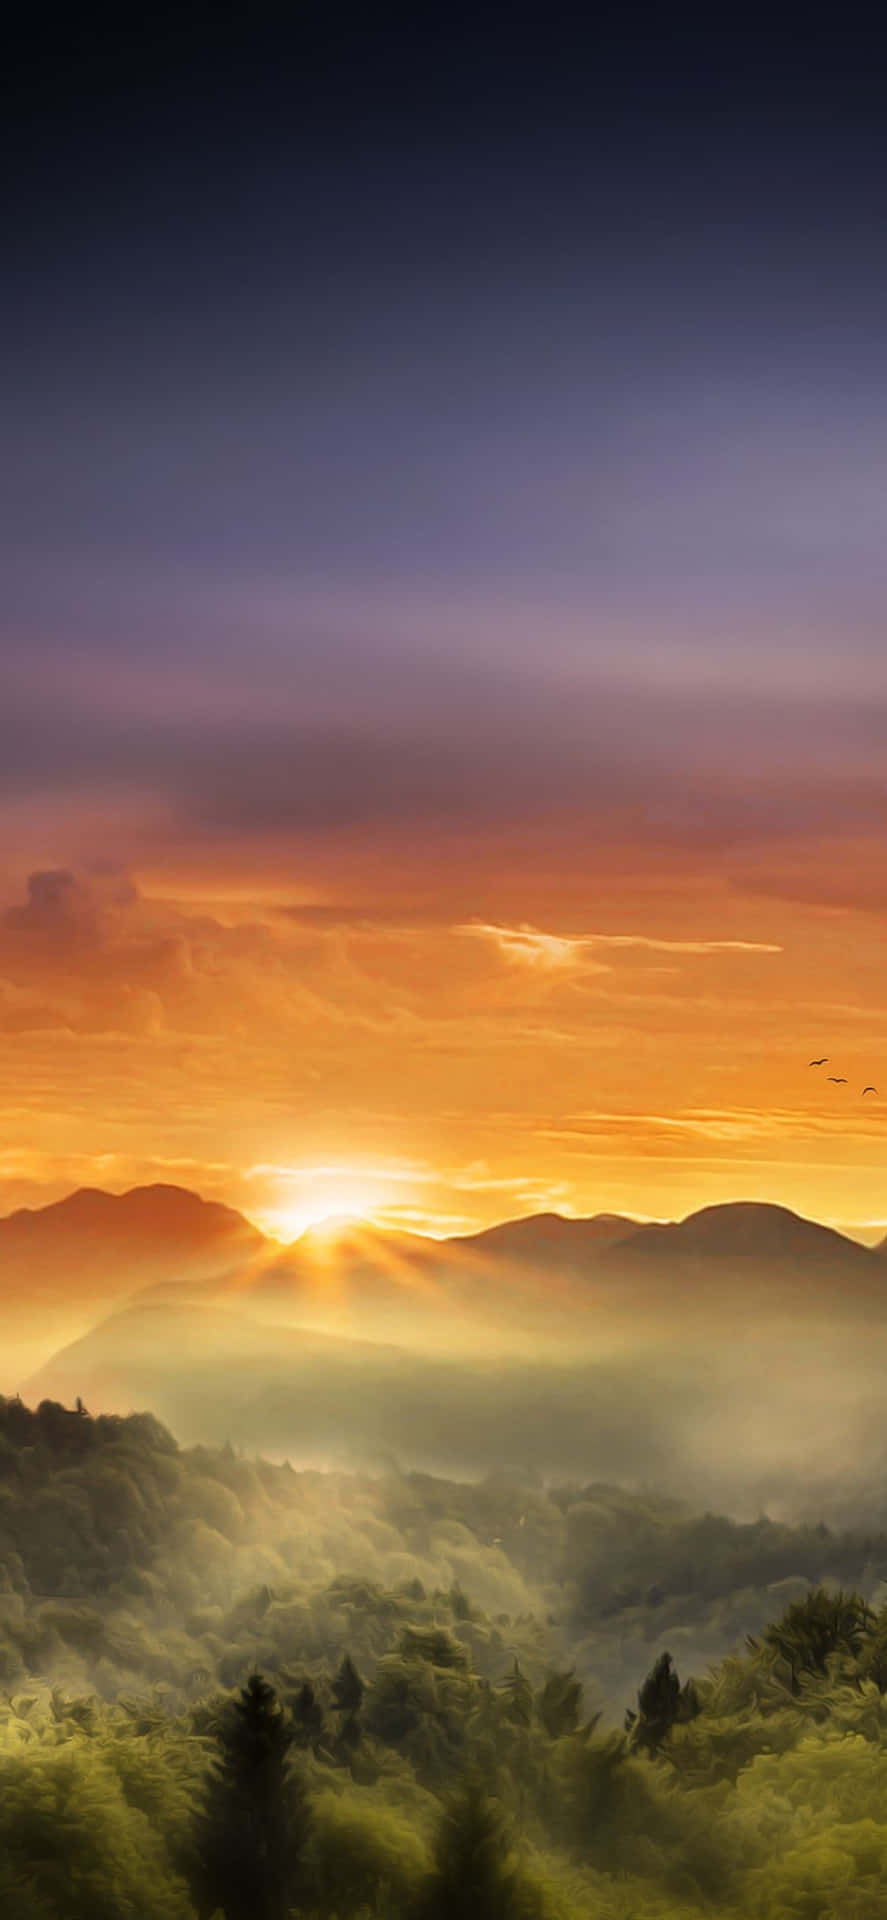 Sunrise Iphone Over Valley And Mountains Wallpaper